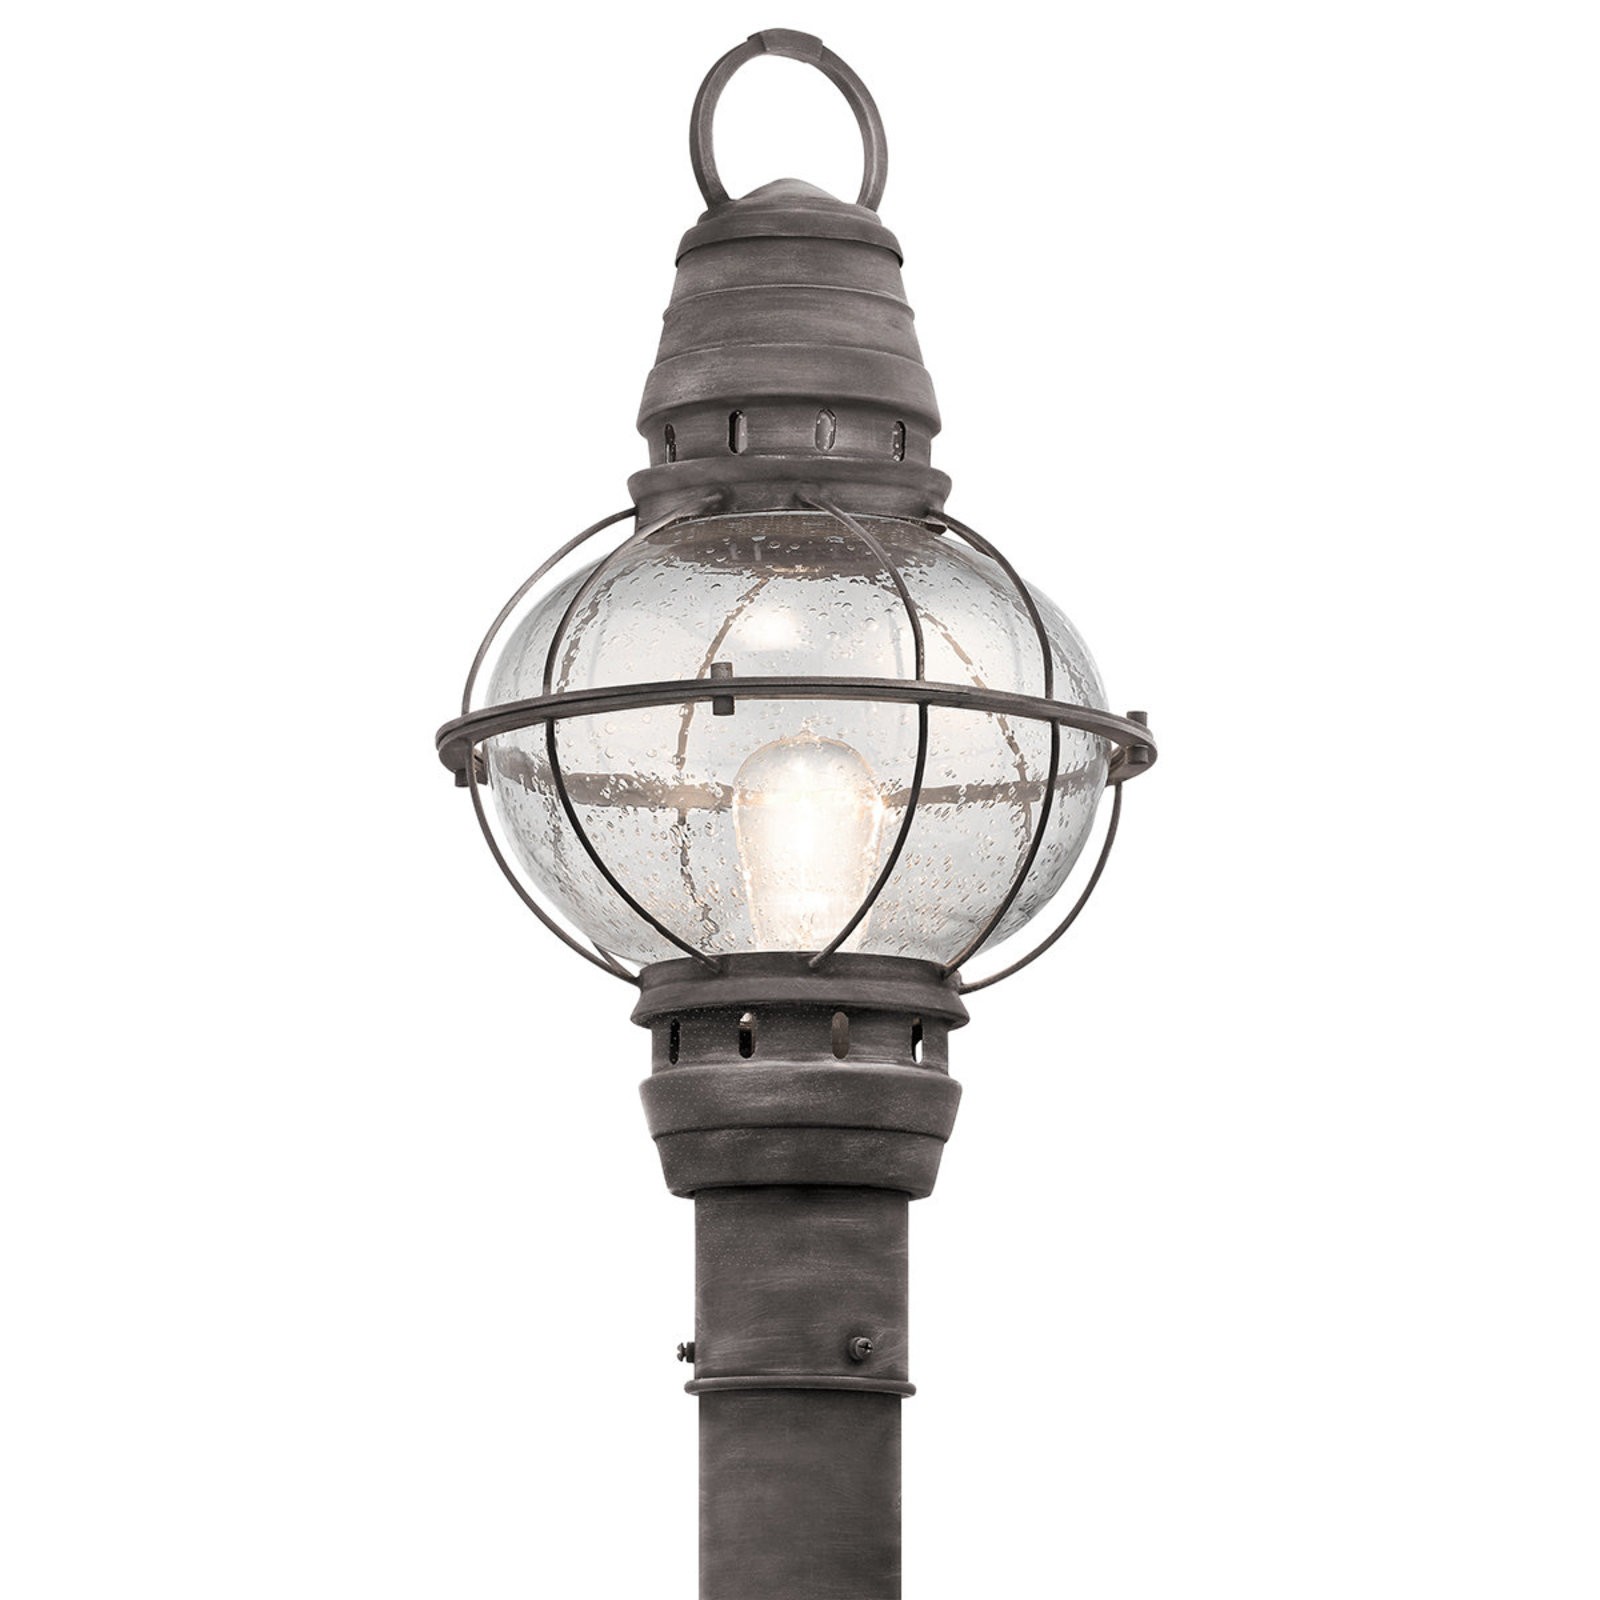 Seeded glass globe outdoor post lantern shades of light